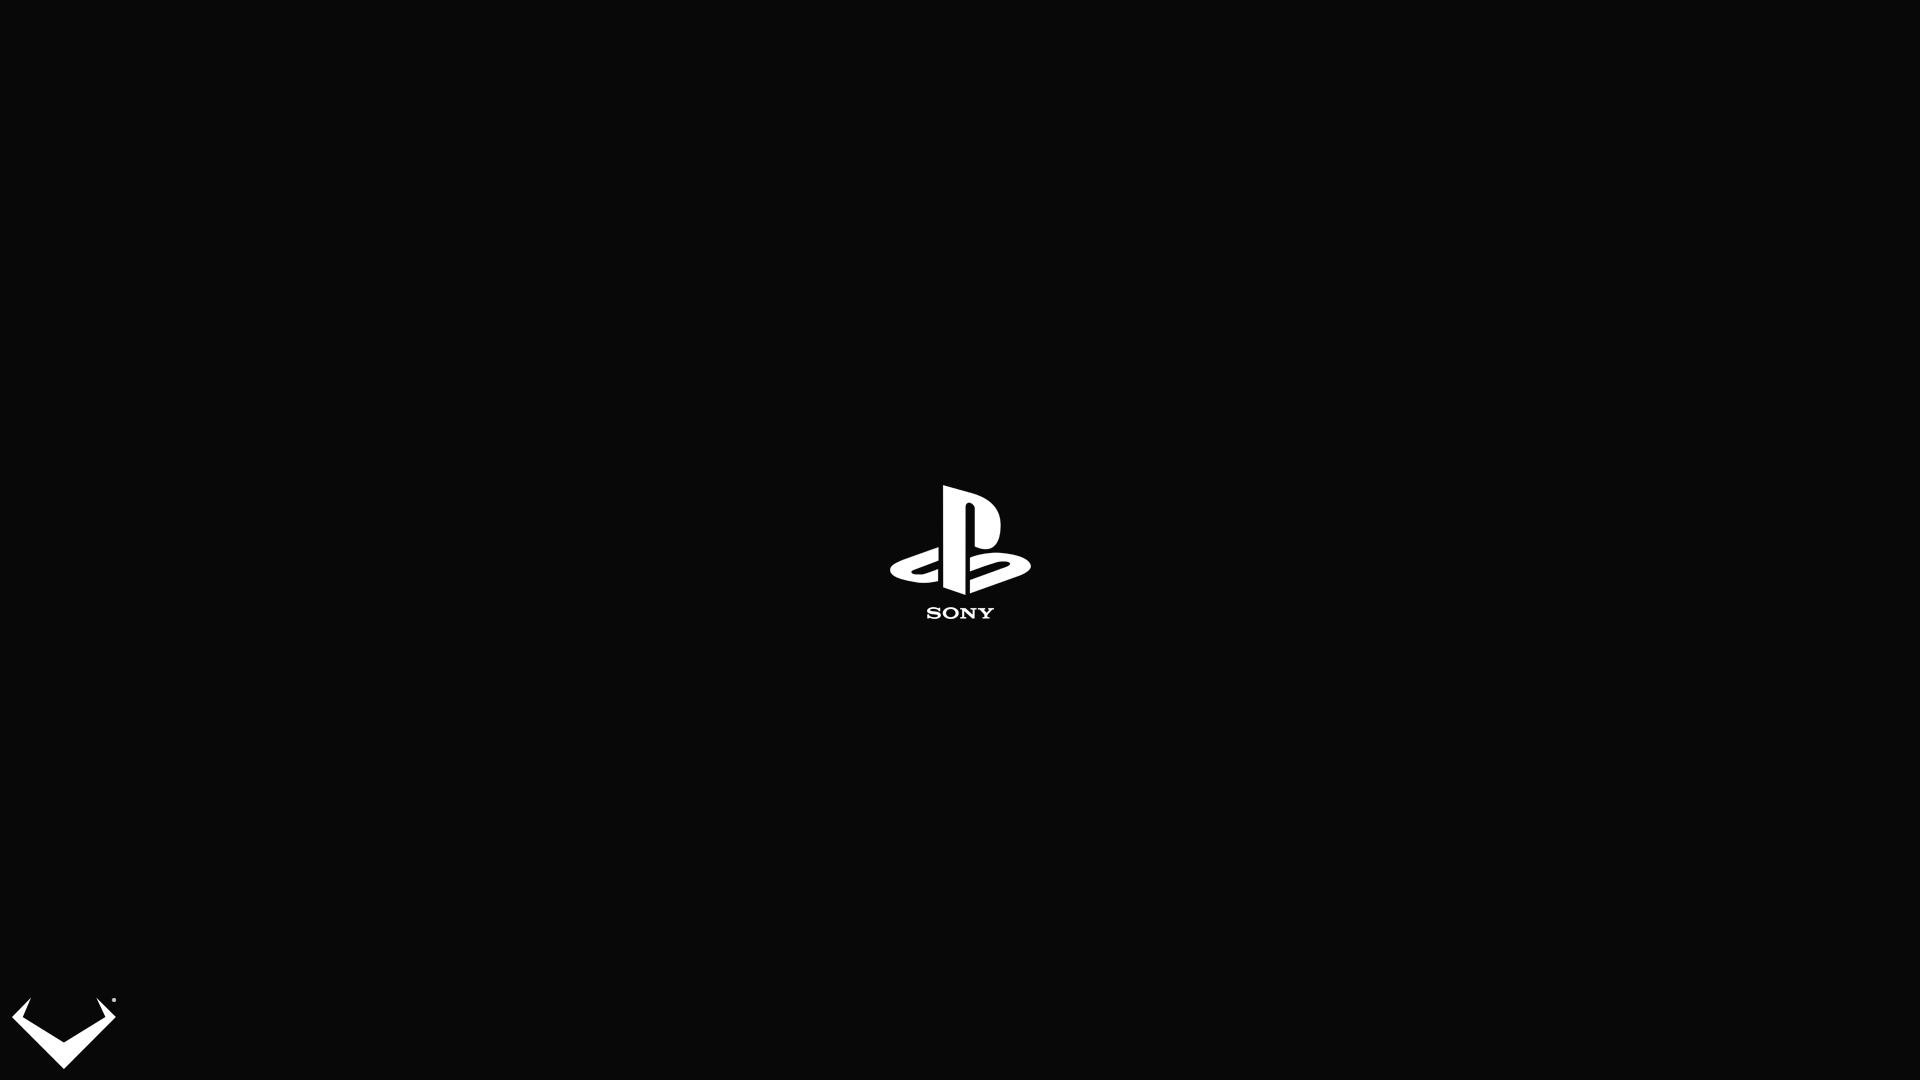 For Playstation Lovers   Iphone wallpaper for guys Game wallpaper  iphone Android wallpaper